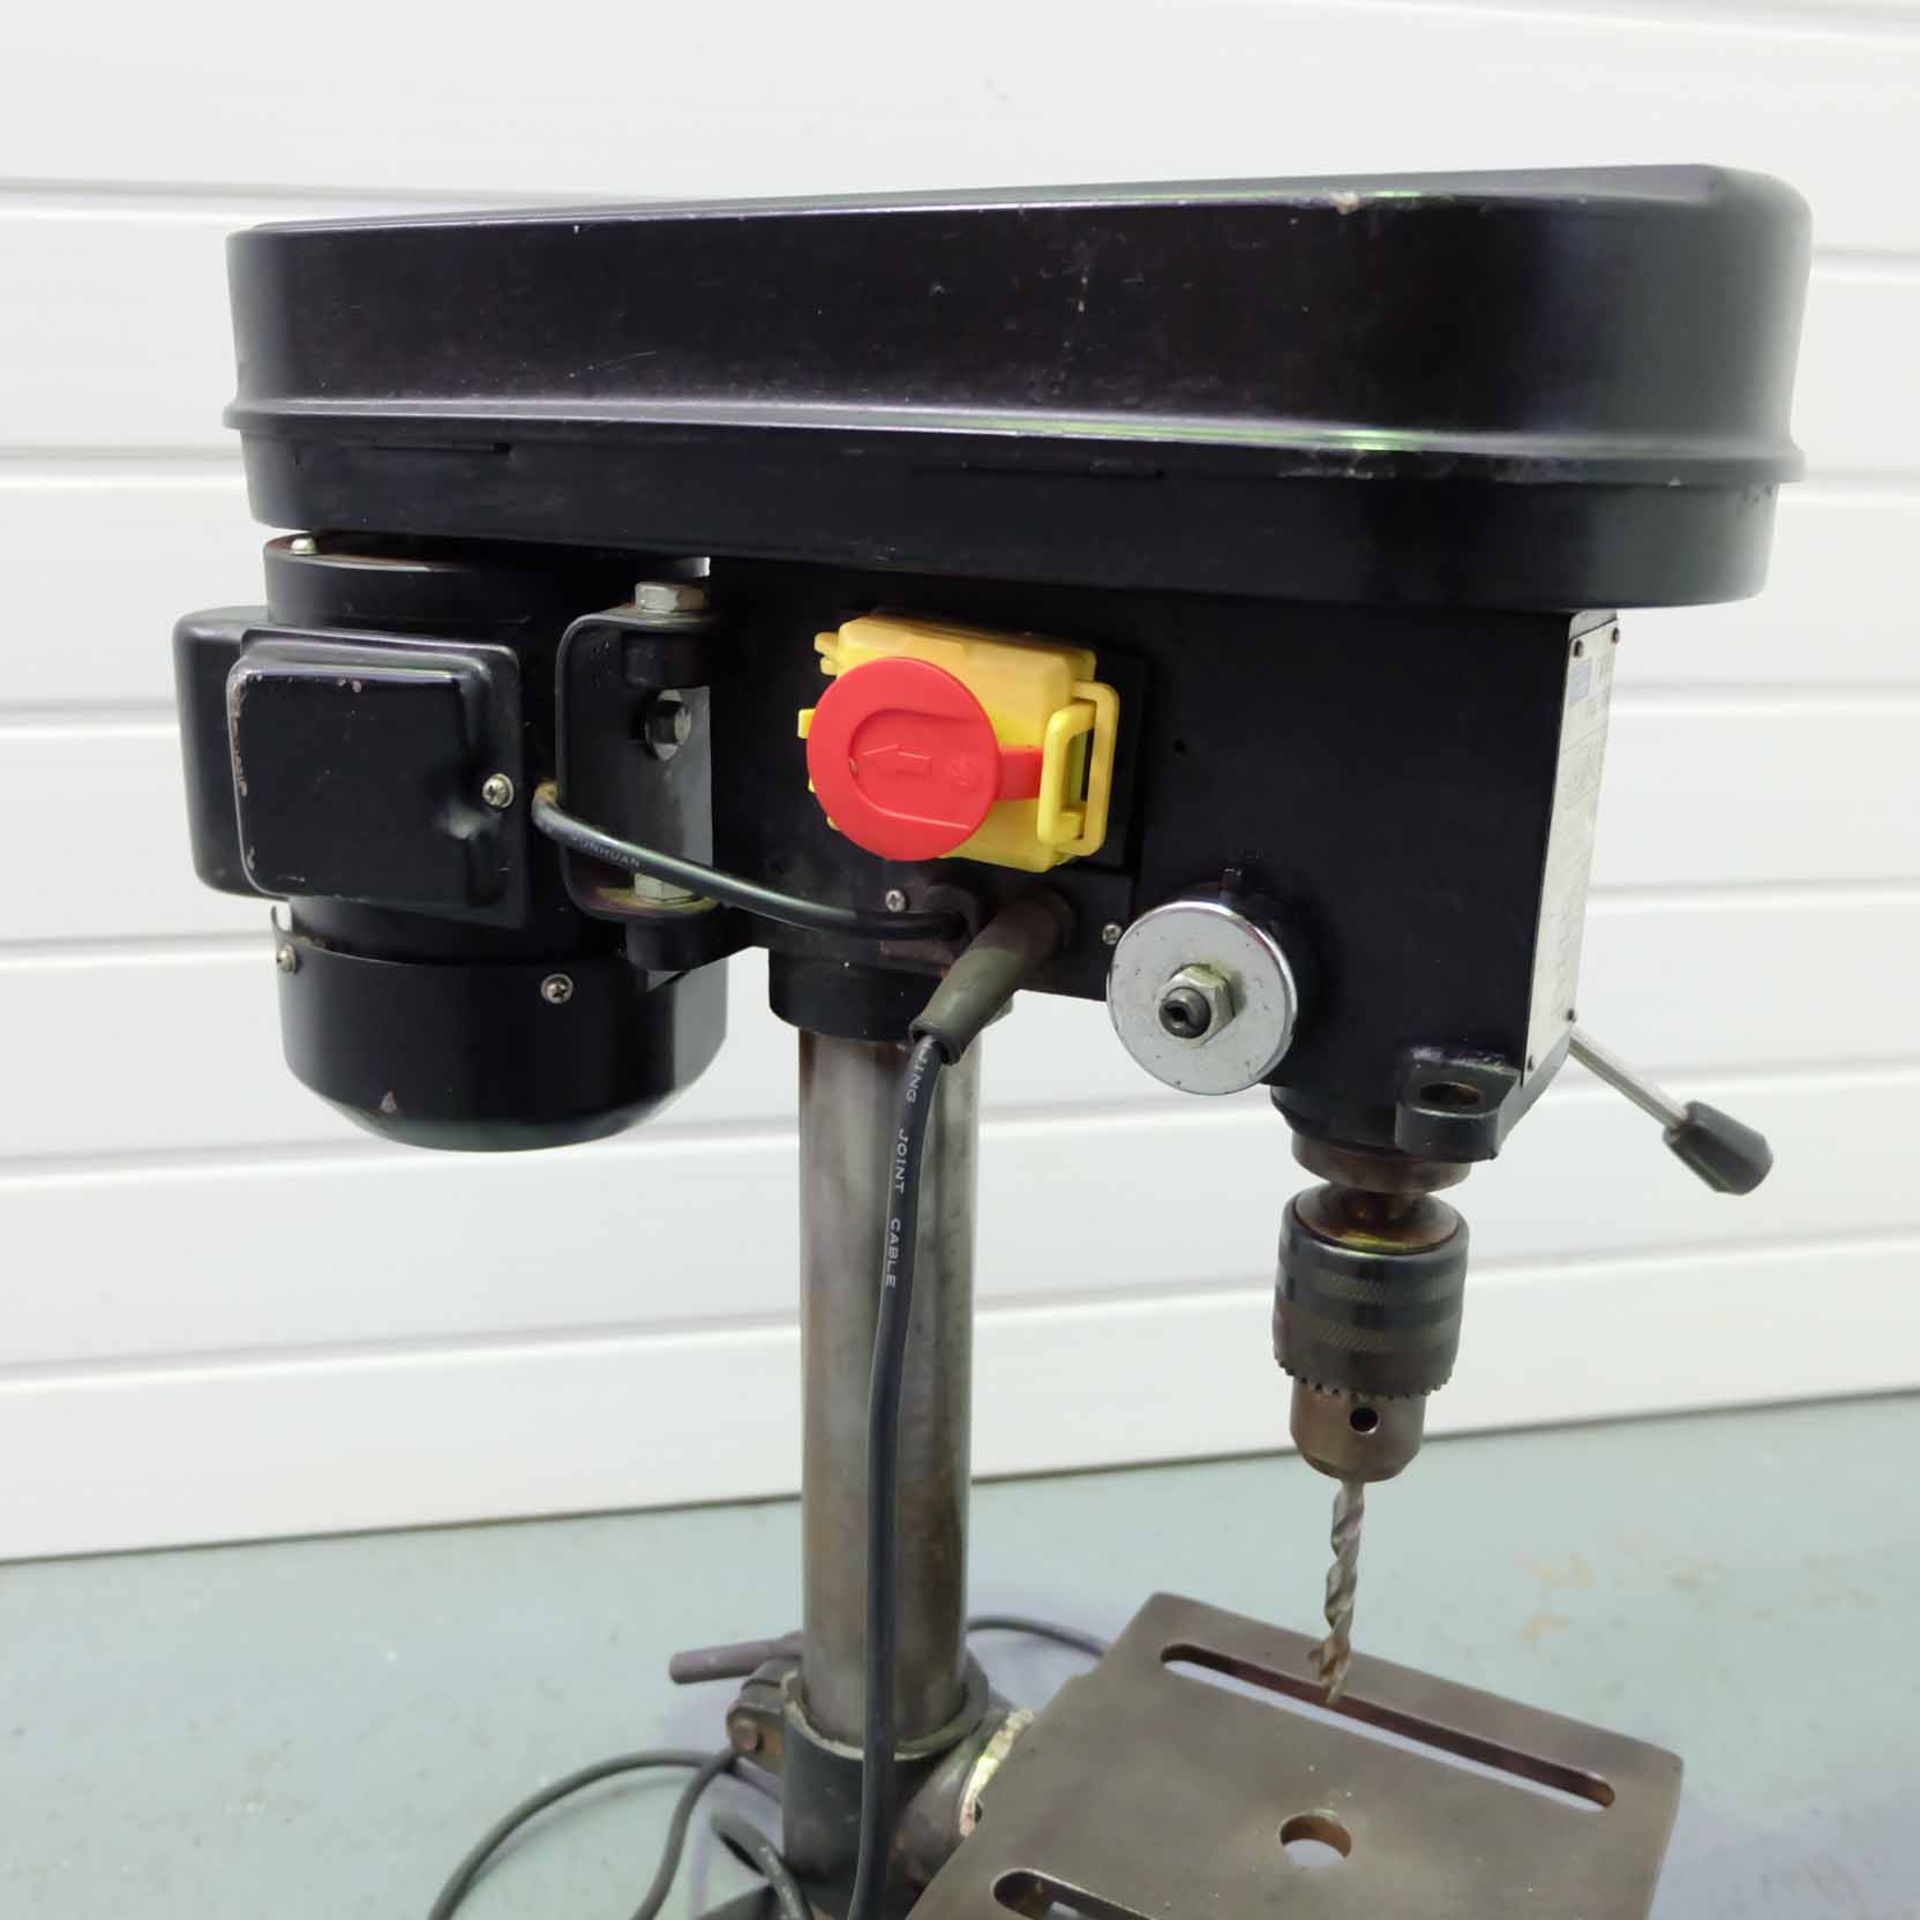 Rolson 5 Speed Bench Drill. Chuck Capacity 13mm. Speeds 520 - 2620rpm. Single Phase, 230 Volt, 350W. - Image 4 of 6